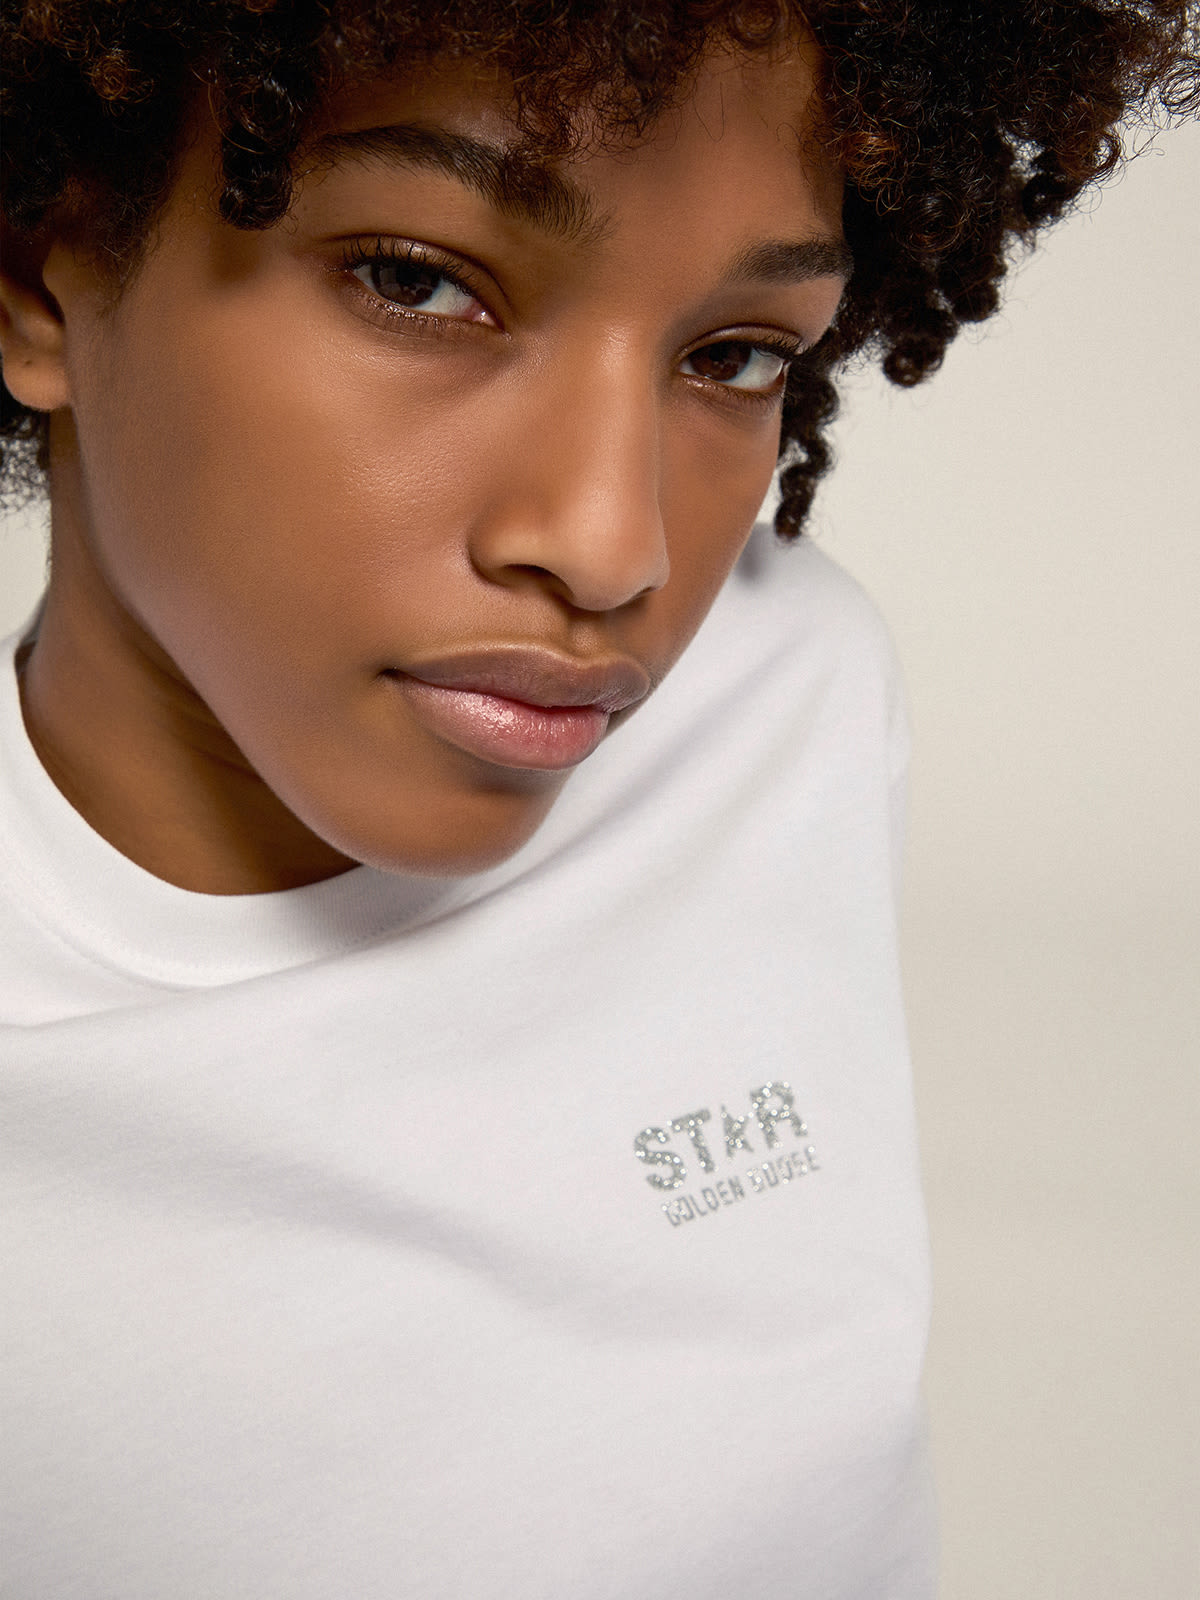 Golden Goose - White Star Collection T-shirt with logo and star in silver glitter in 